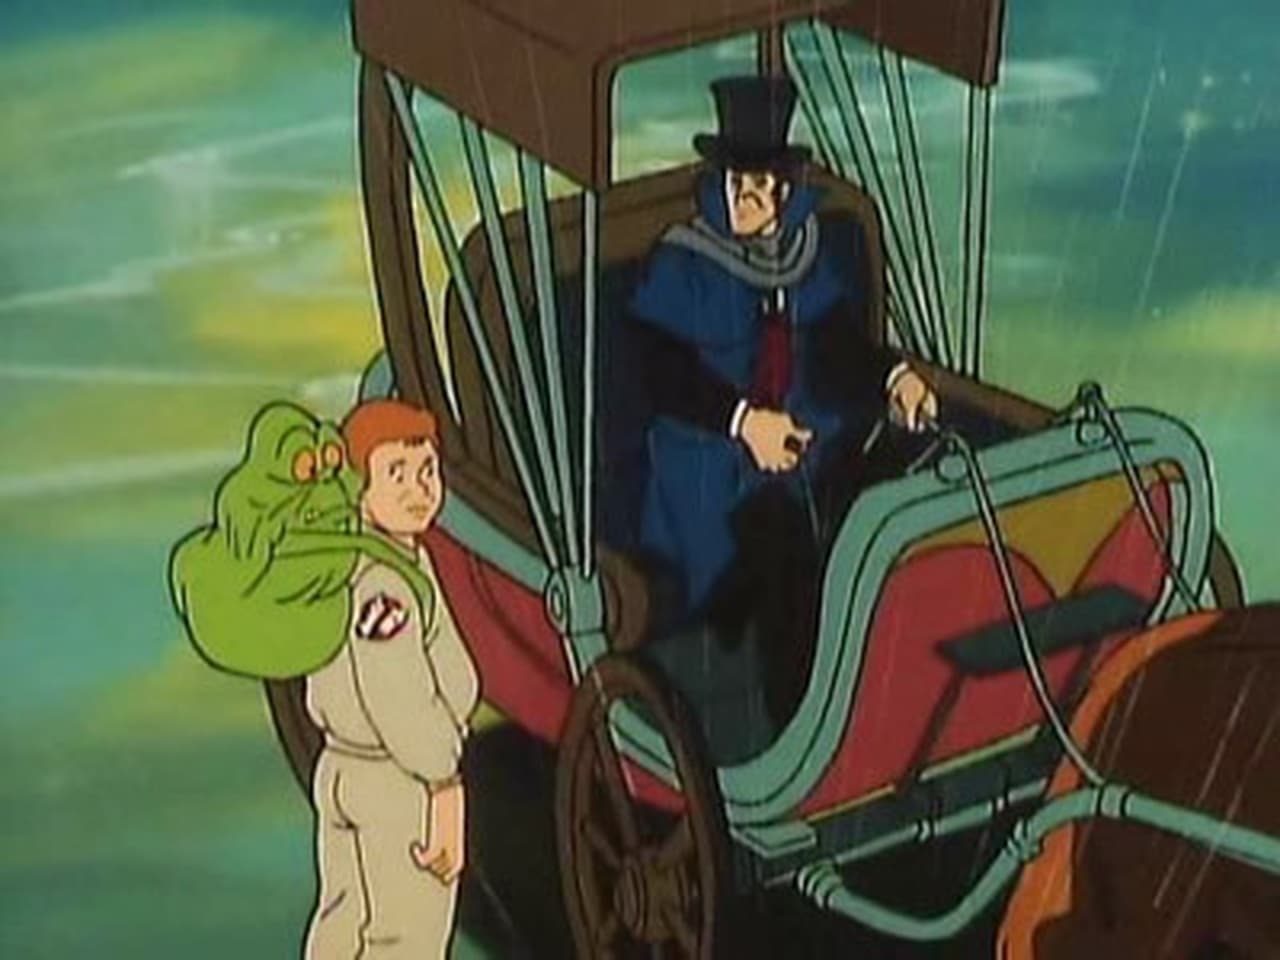 The Real Ghostbusters - Season 2 Episode 21 : The Man Who Never Reached Home